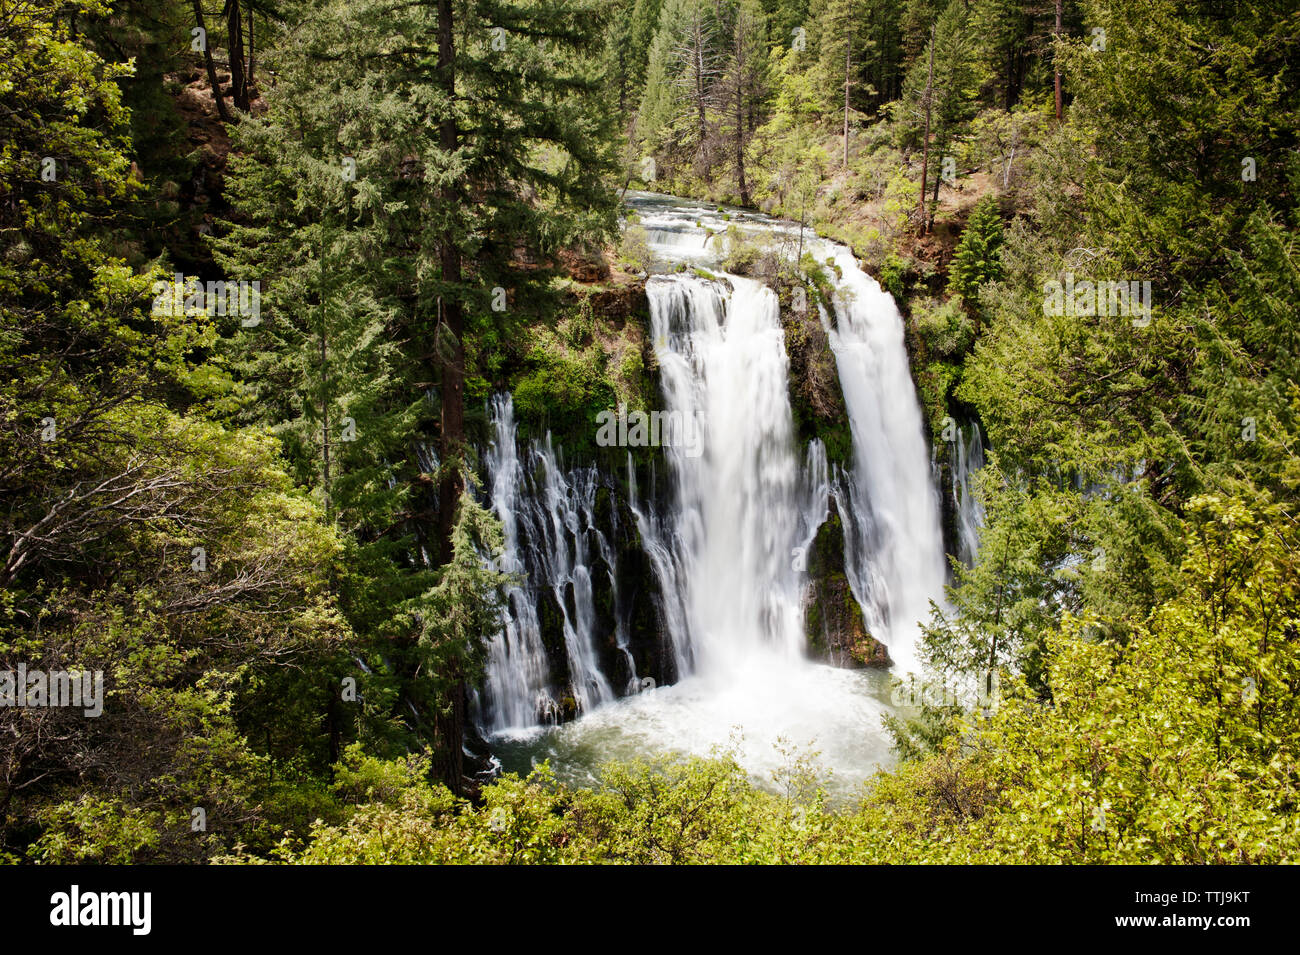 Scenic view of waterfall in forest Stock Photo